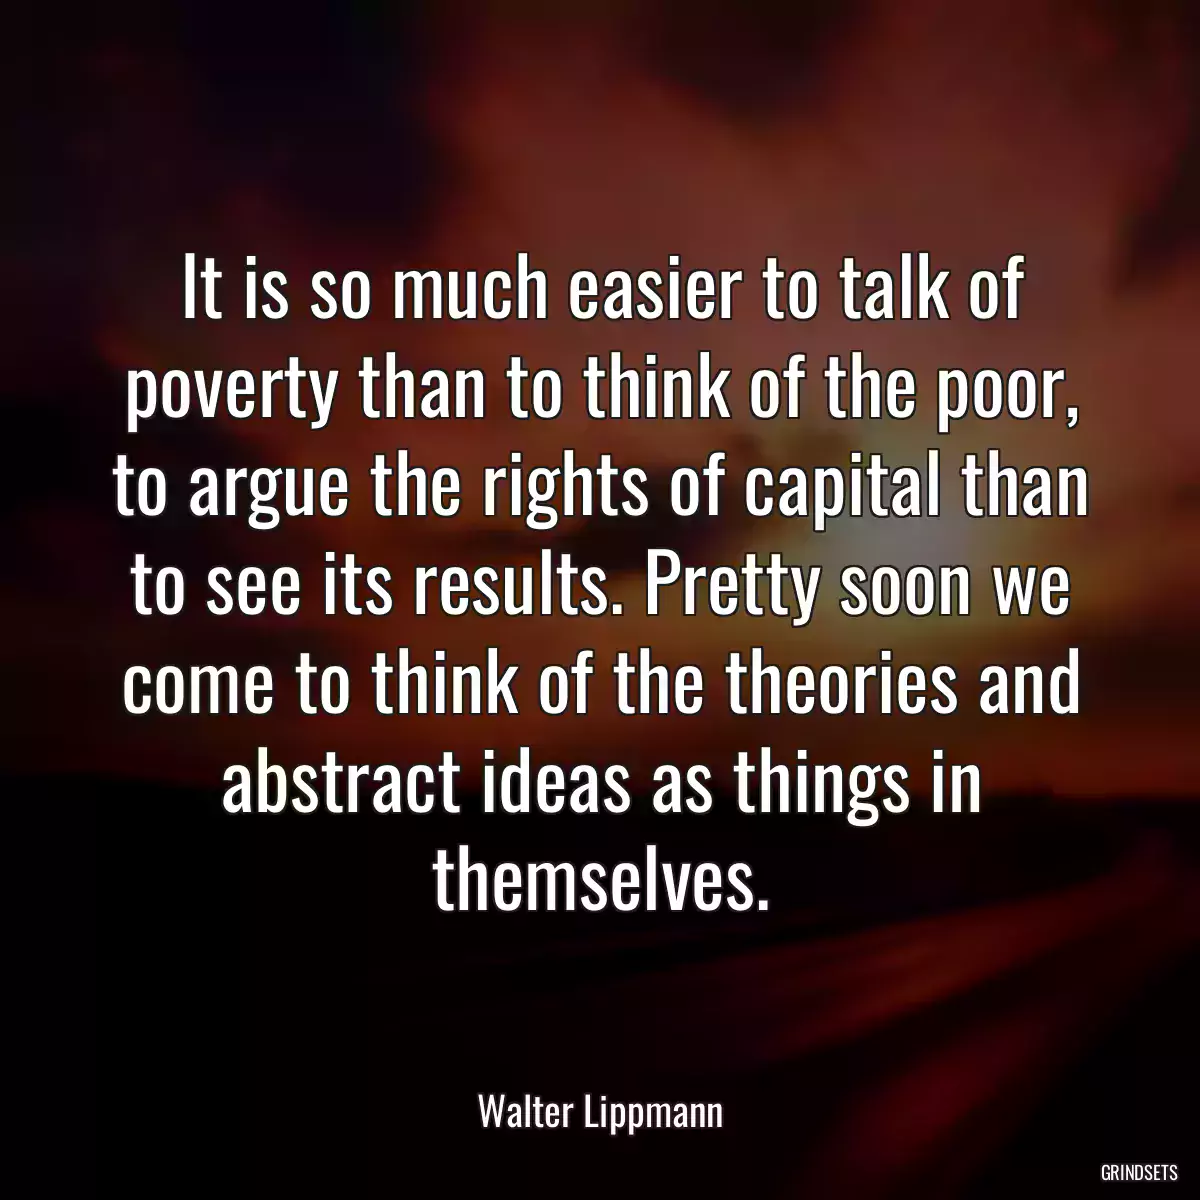 It is so much easier to talk of poverty than to think of the poor, to argue the rights of capital than to see its results. Pretty soon we come to think of the theories and abstract ideas as things in themselves.